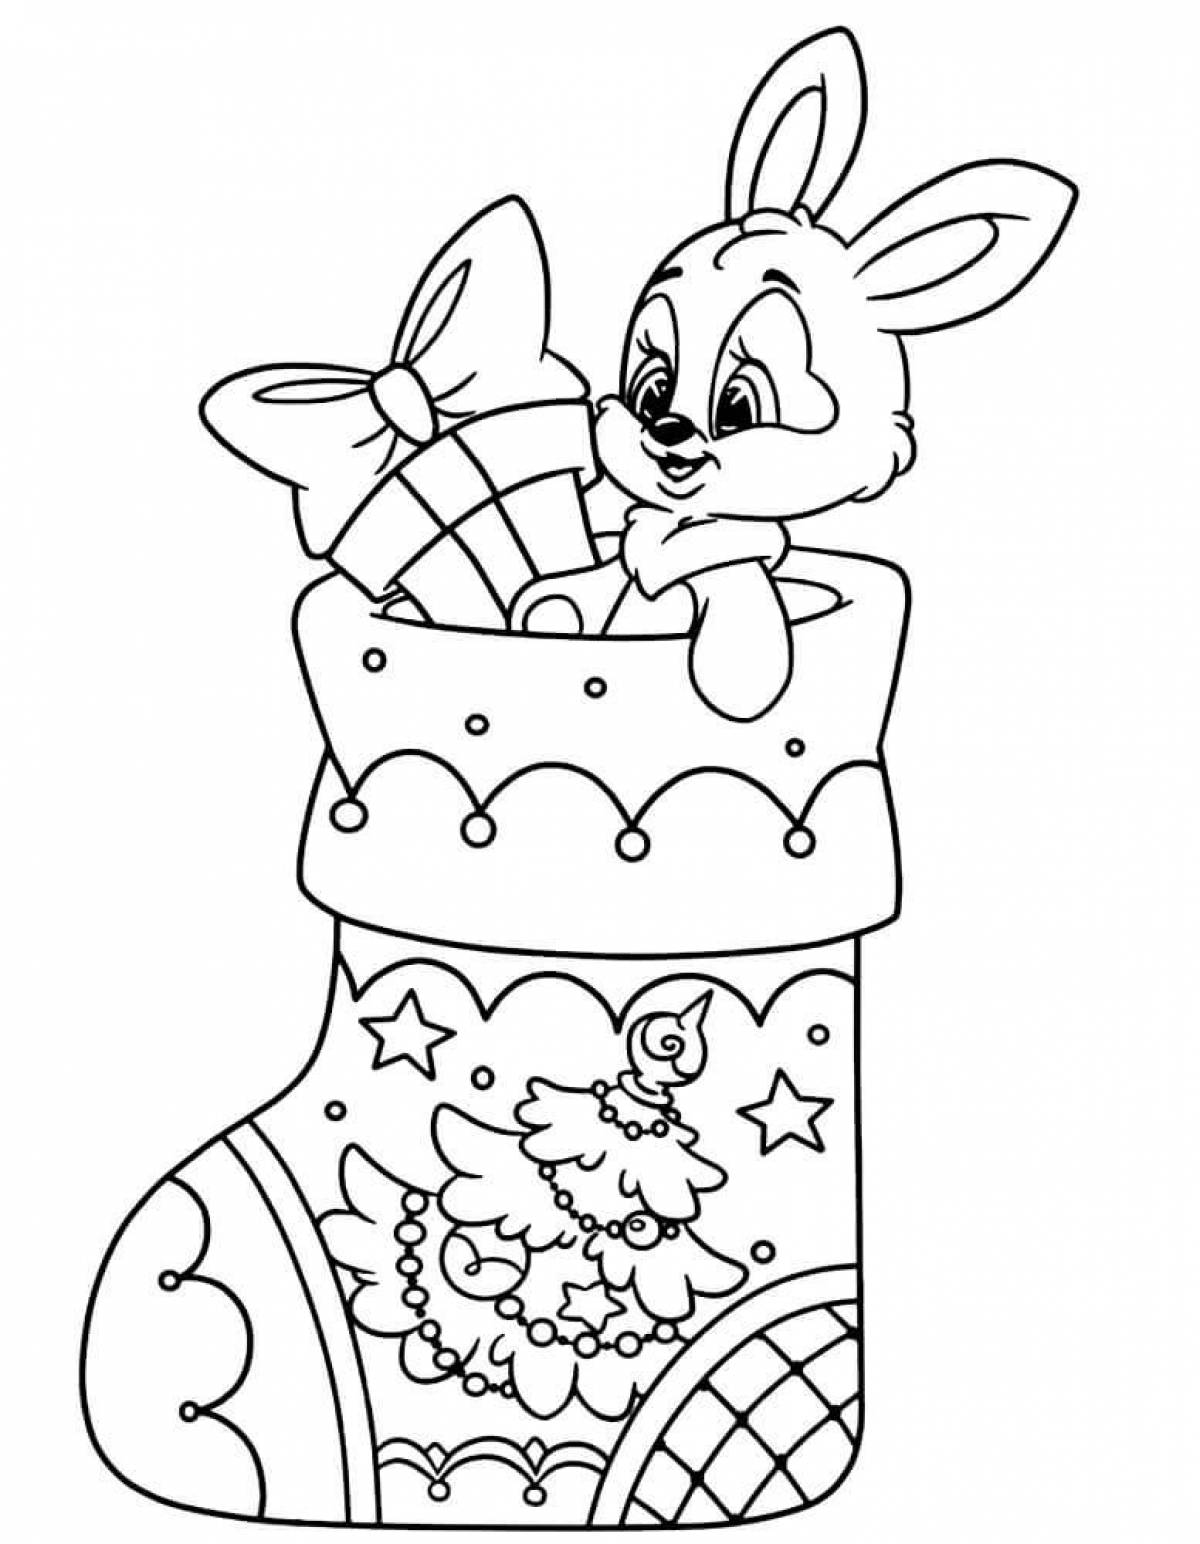 Glowing Christmas Bunny Coloring Page